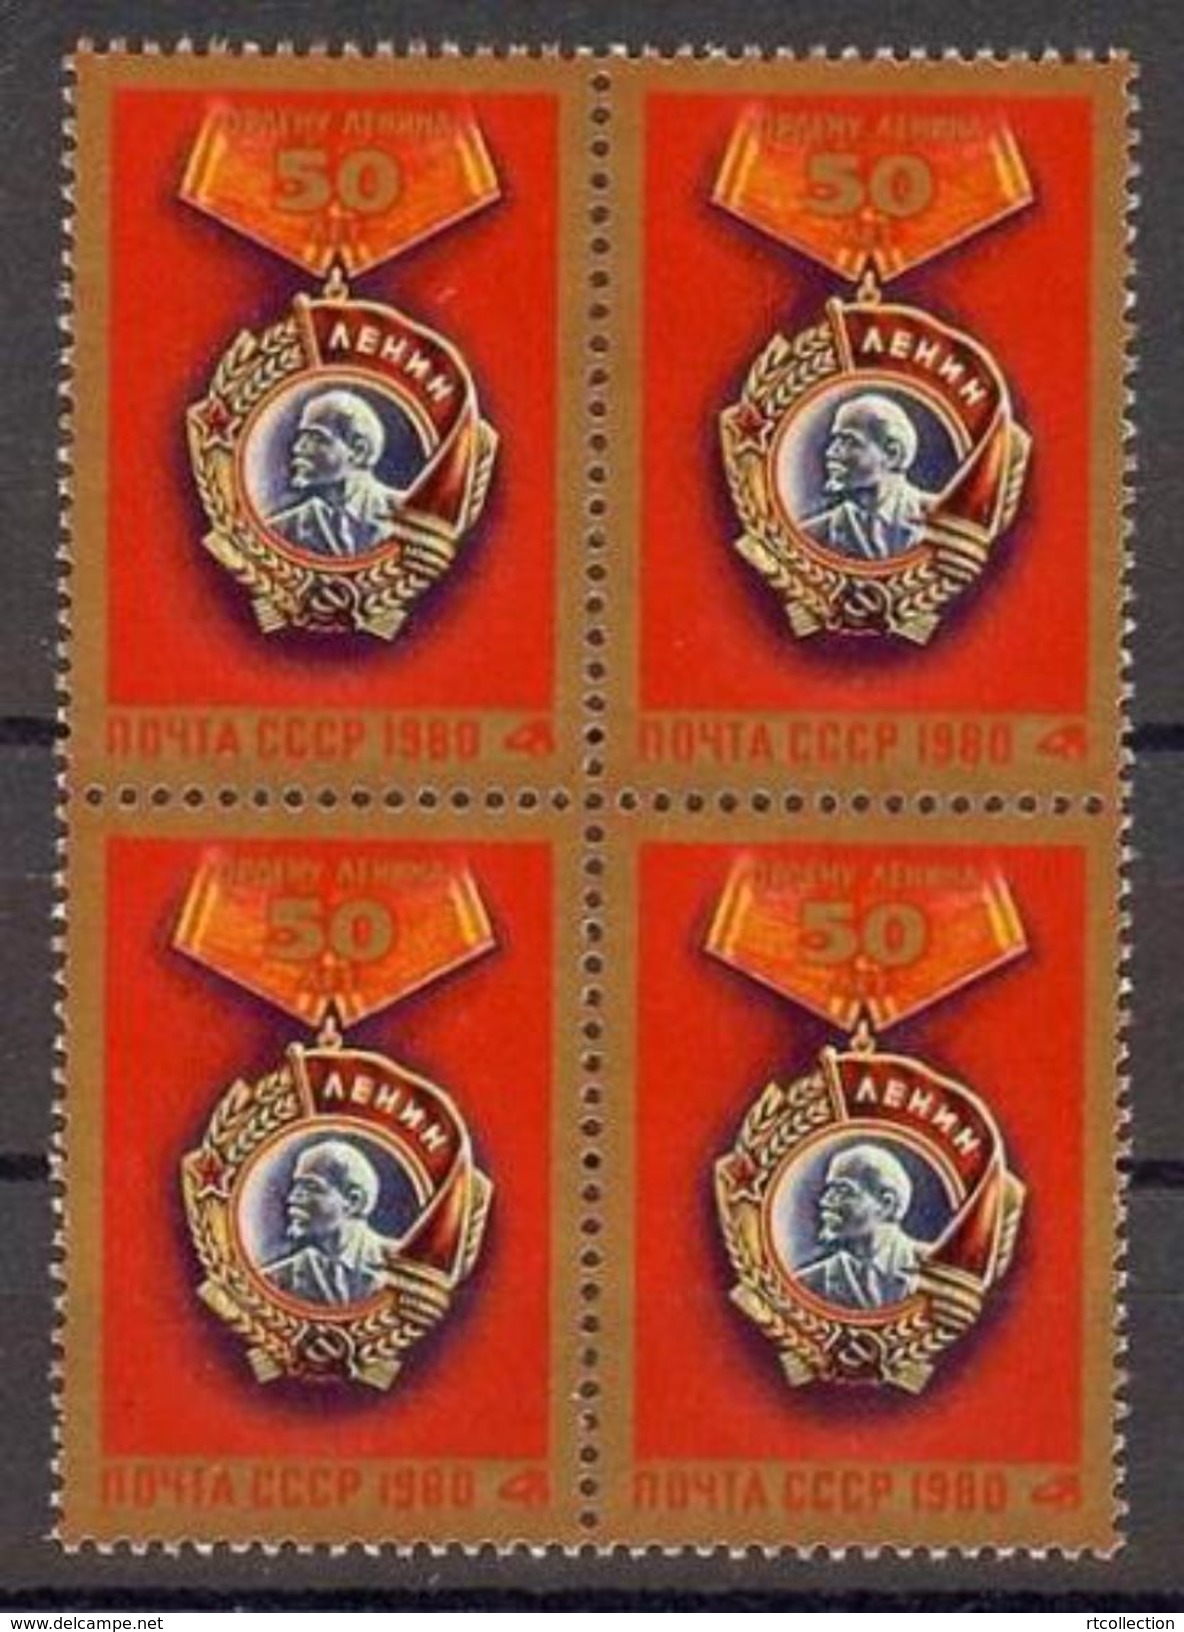 USSR Russia 1980 Block  50th Anniv Oreder Of Lenin Famous People Politician Medal Coat Of Arms Stamp Michel 4942 Sc#4819 - Lenin